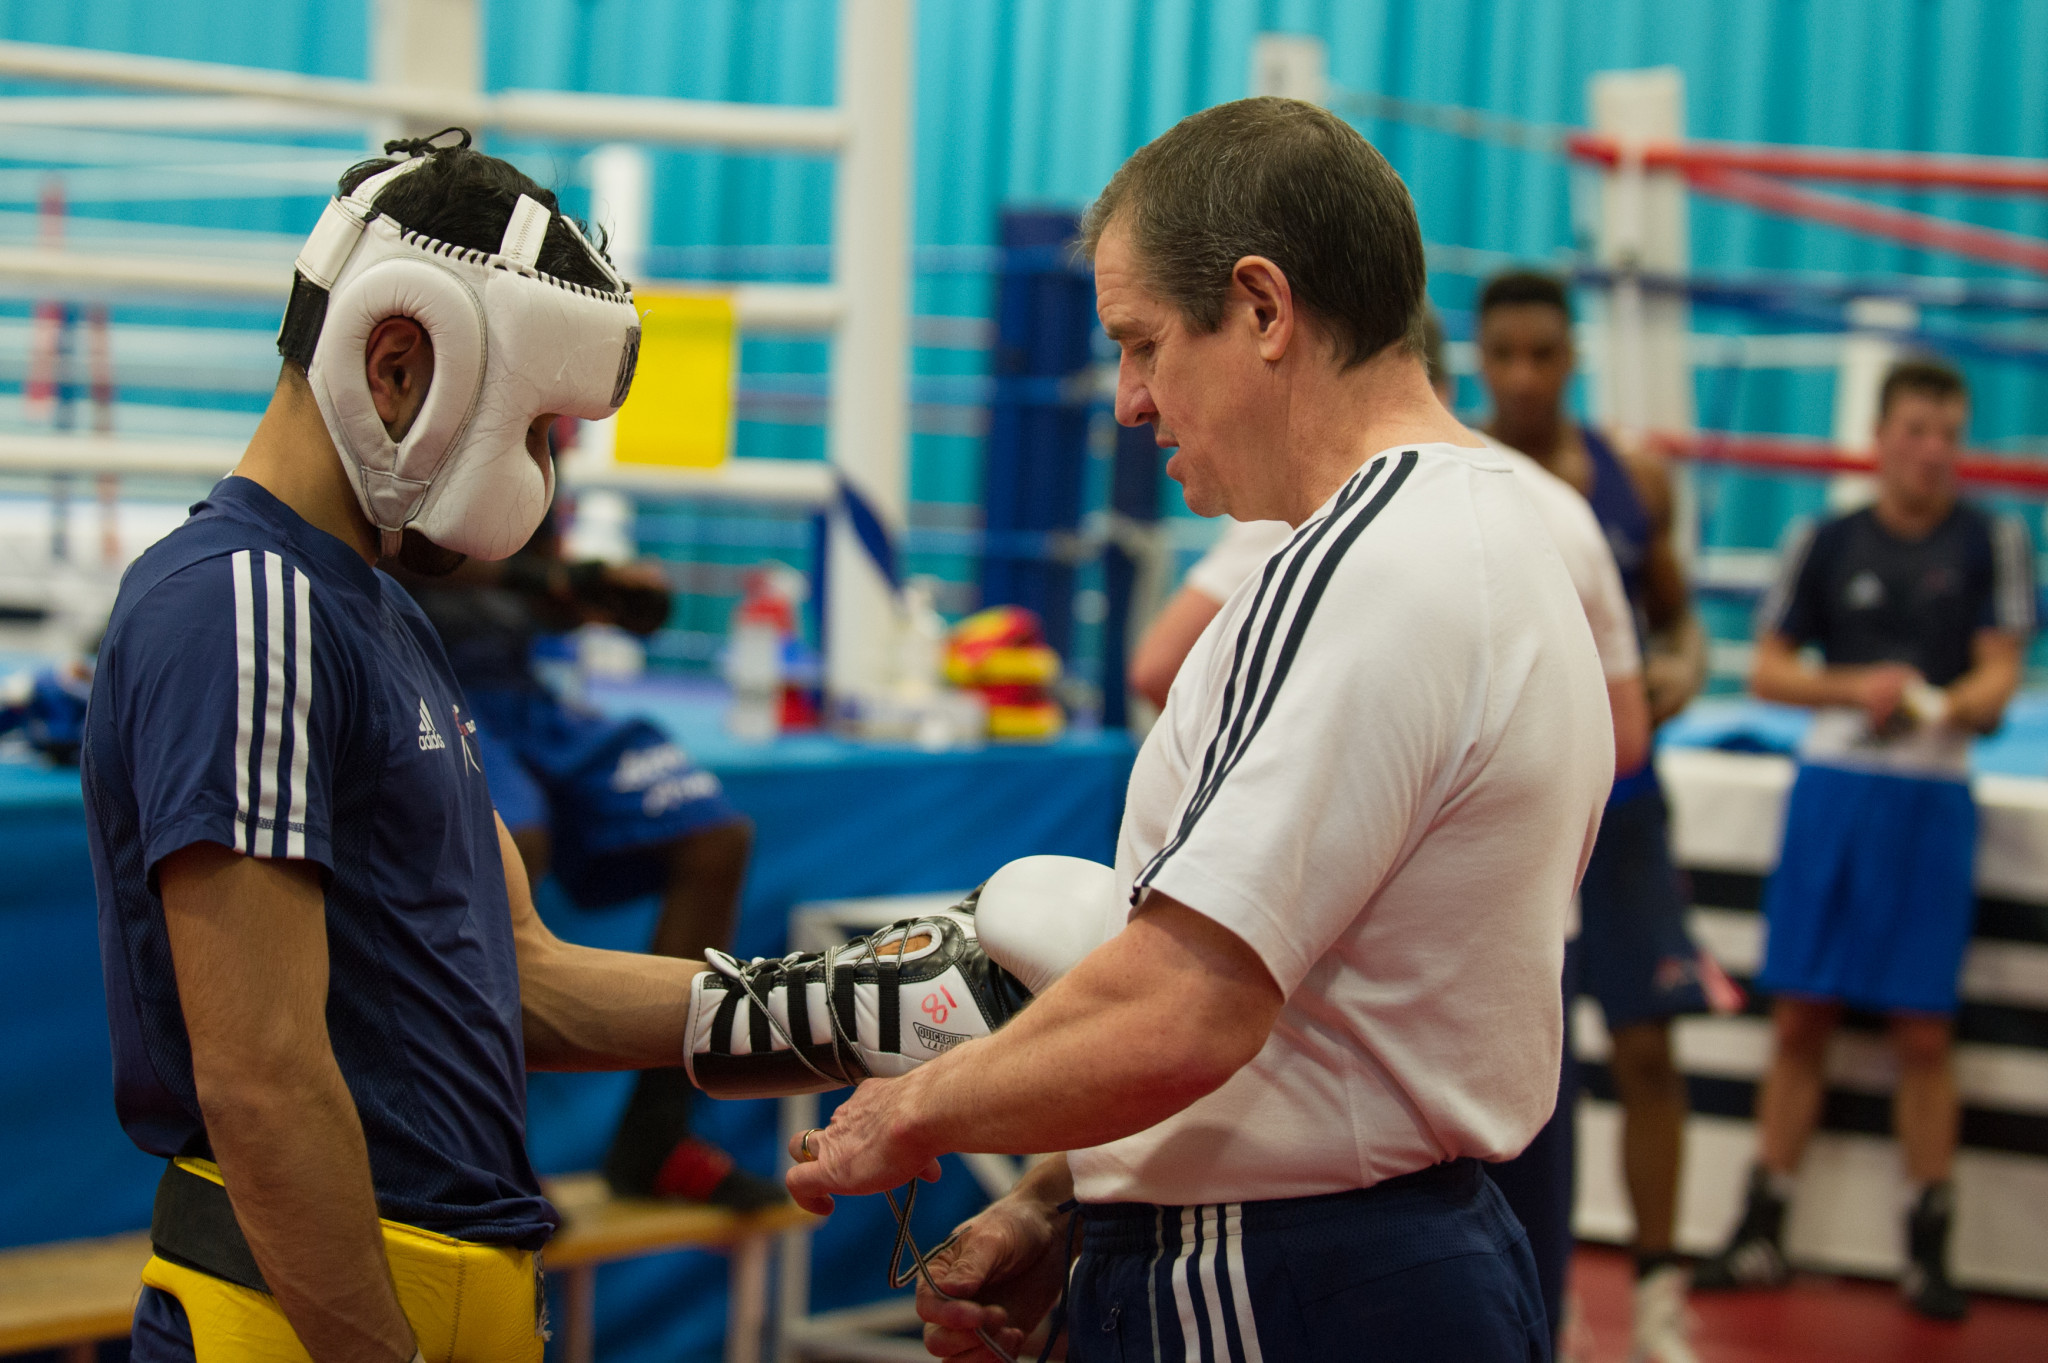 Experienced boxing coach Walmsley leaves British team prior to Tokyo 2020